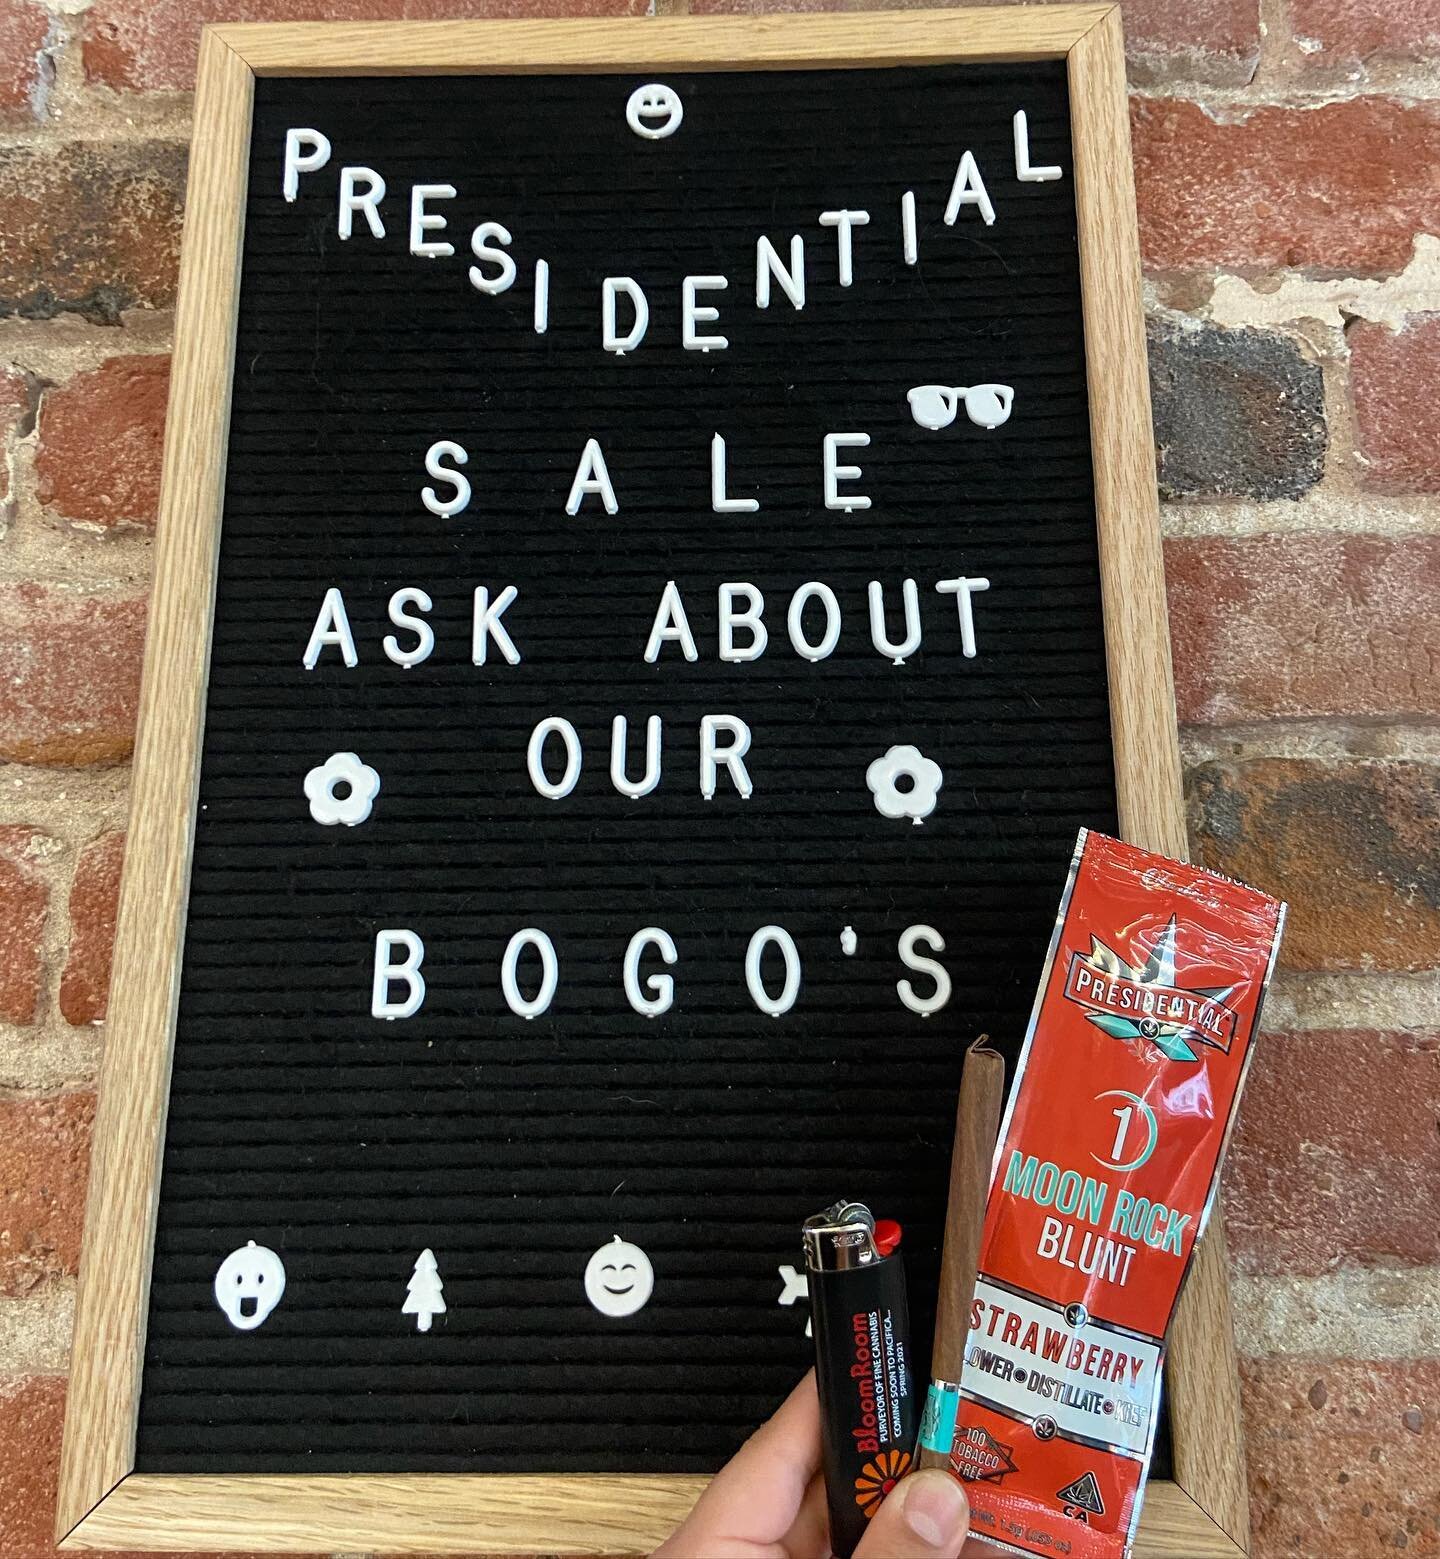 TGIF! Before the weekend starts come check out what we have in stock for our Presidential Blunts at both locations! A nice relaxed start to the weekend never hurt nobody! 🍁 #weekendvibes #hempwrap #bloomroomdispensaries